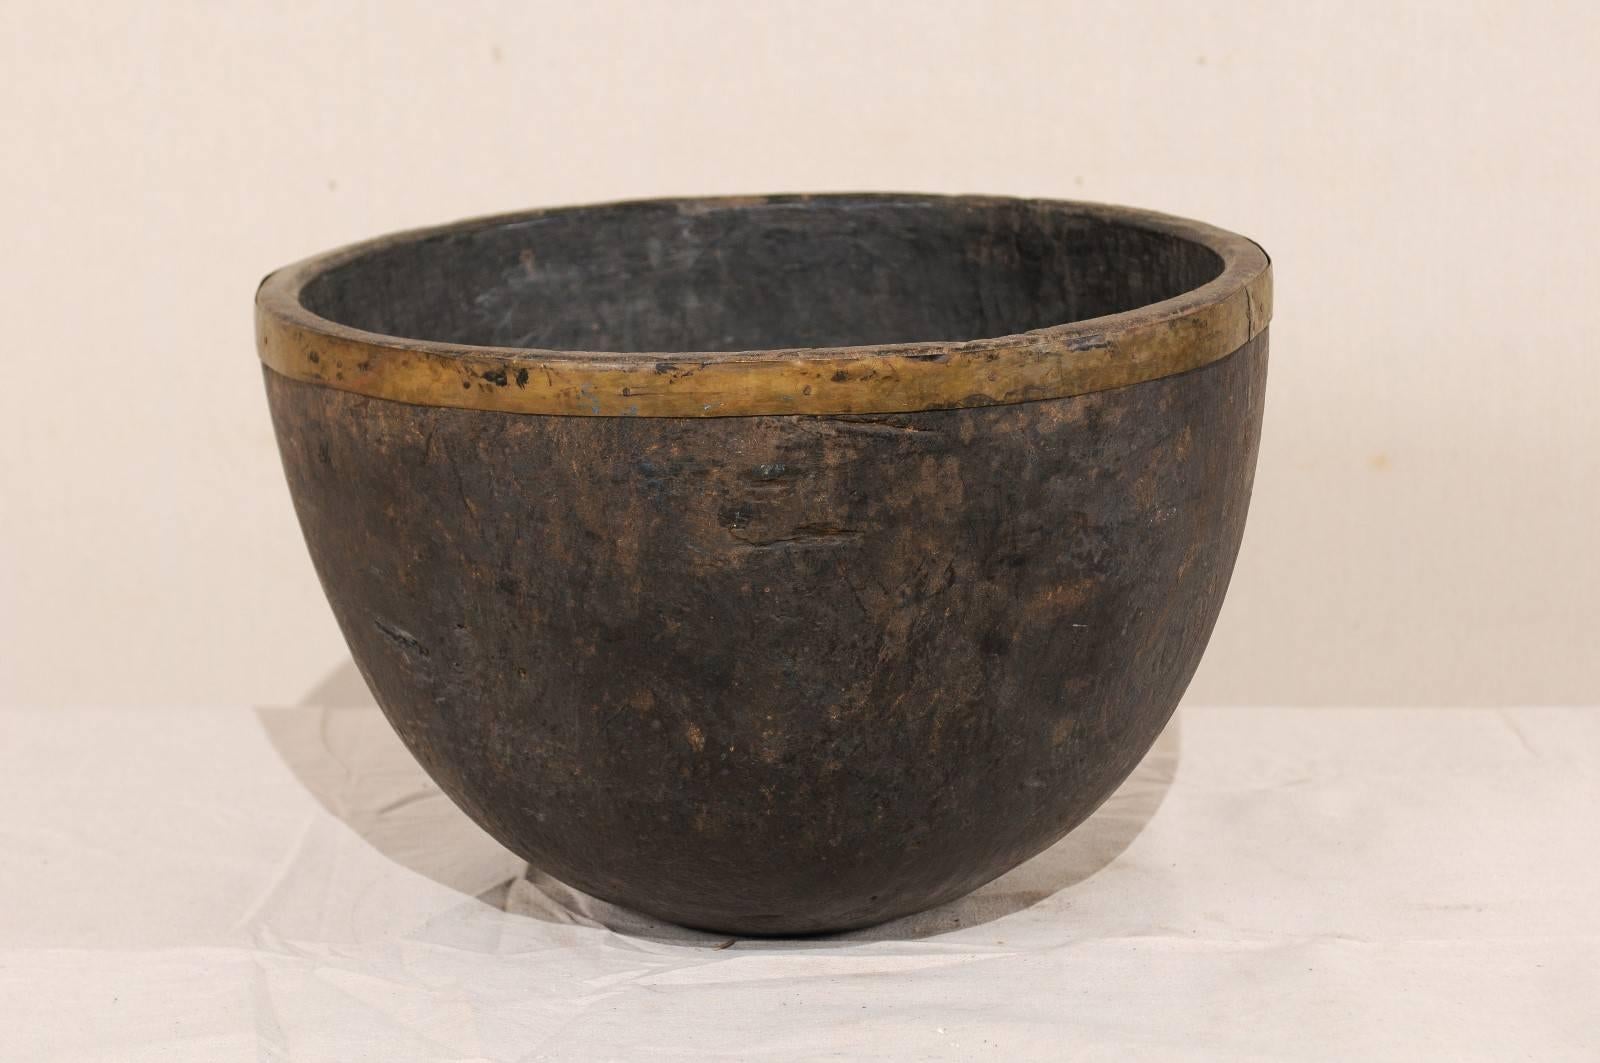 A vintage Naga wood bowl. This beautifully Primitive bowl has been carved from a single piece of wood. These bowls were originally used in kitchens of the Naga People for various food oriented activities including storing and cooking. The Naga